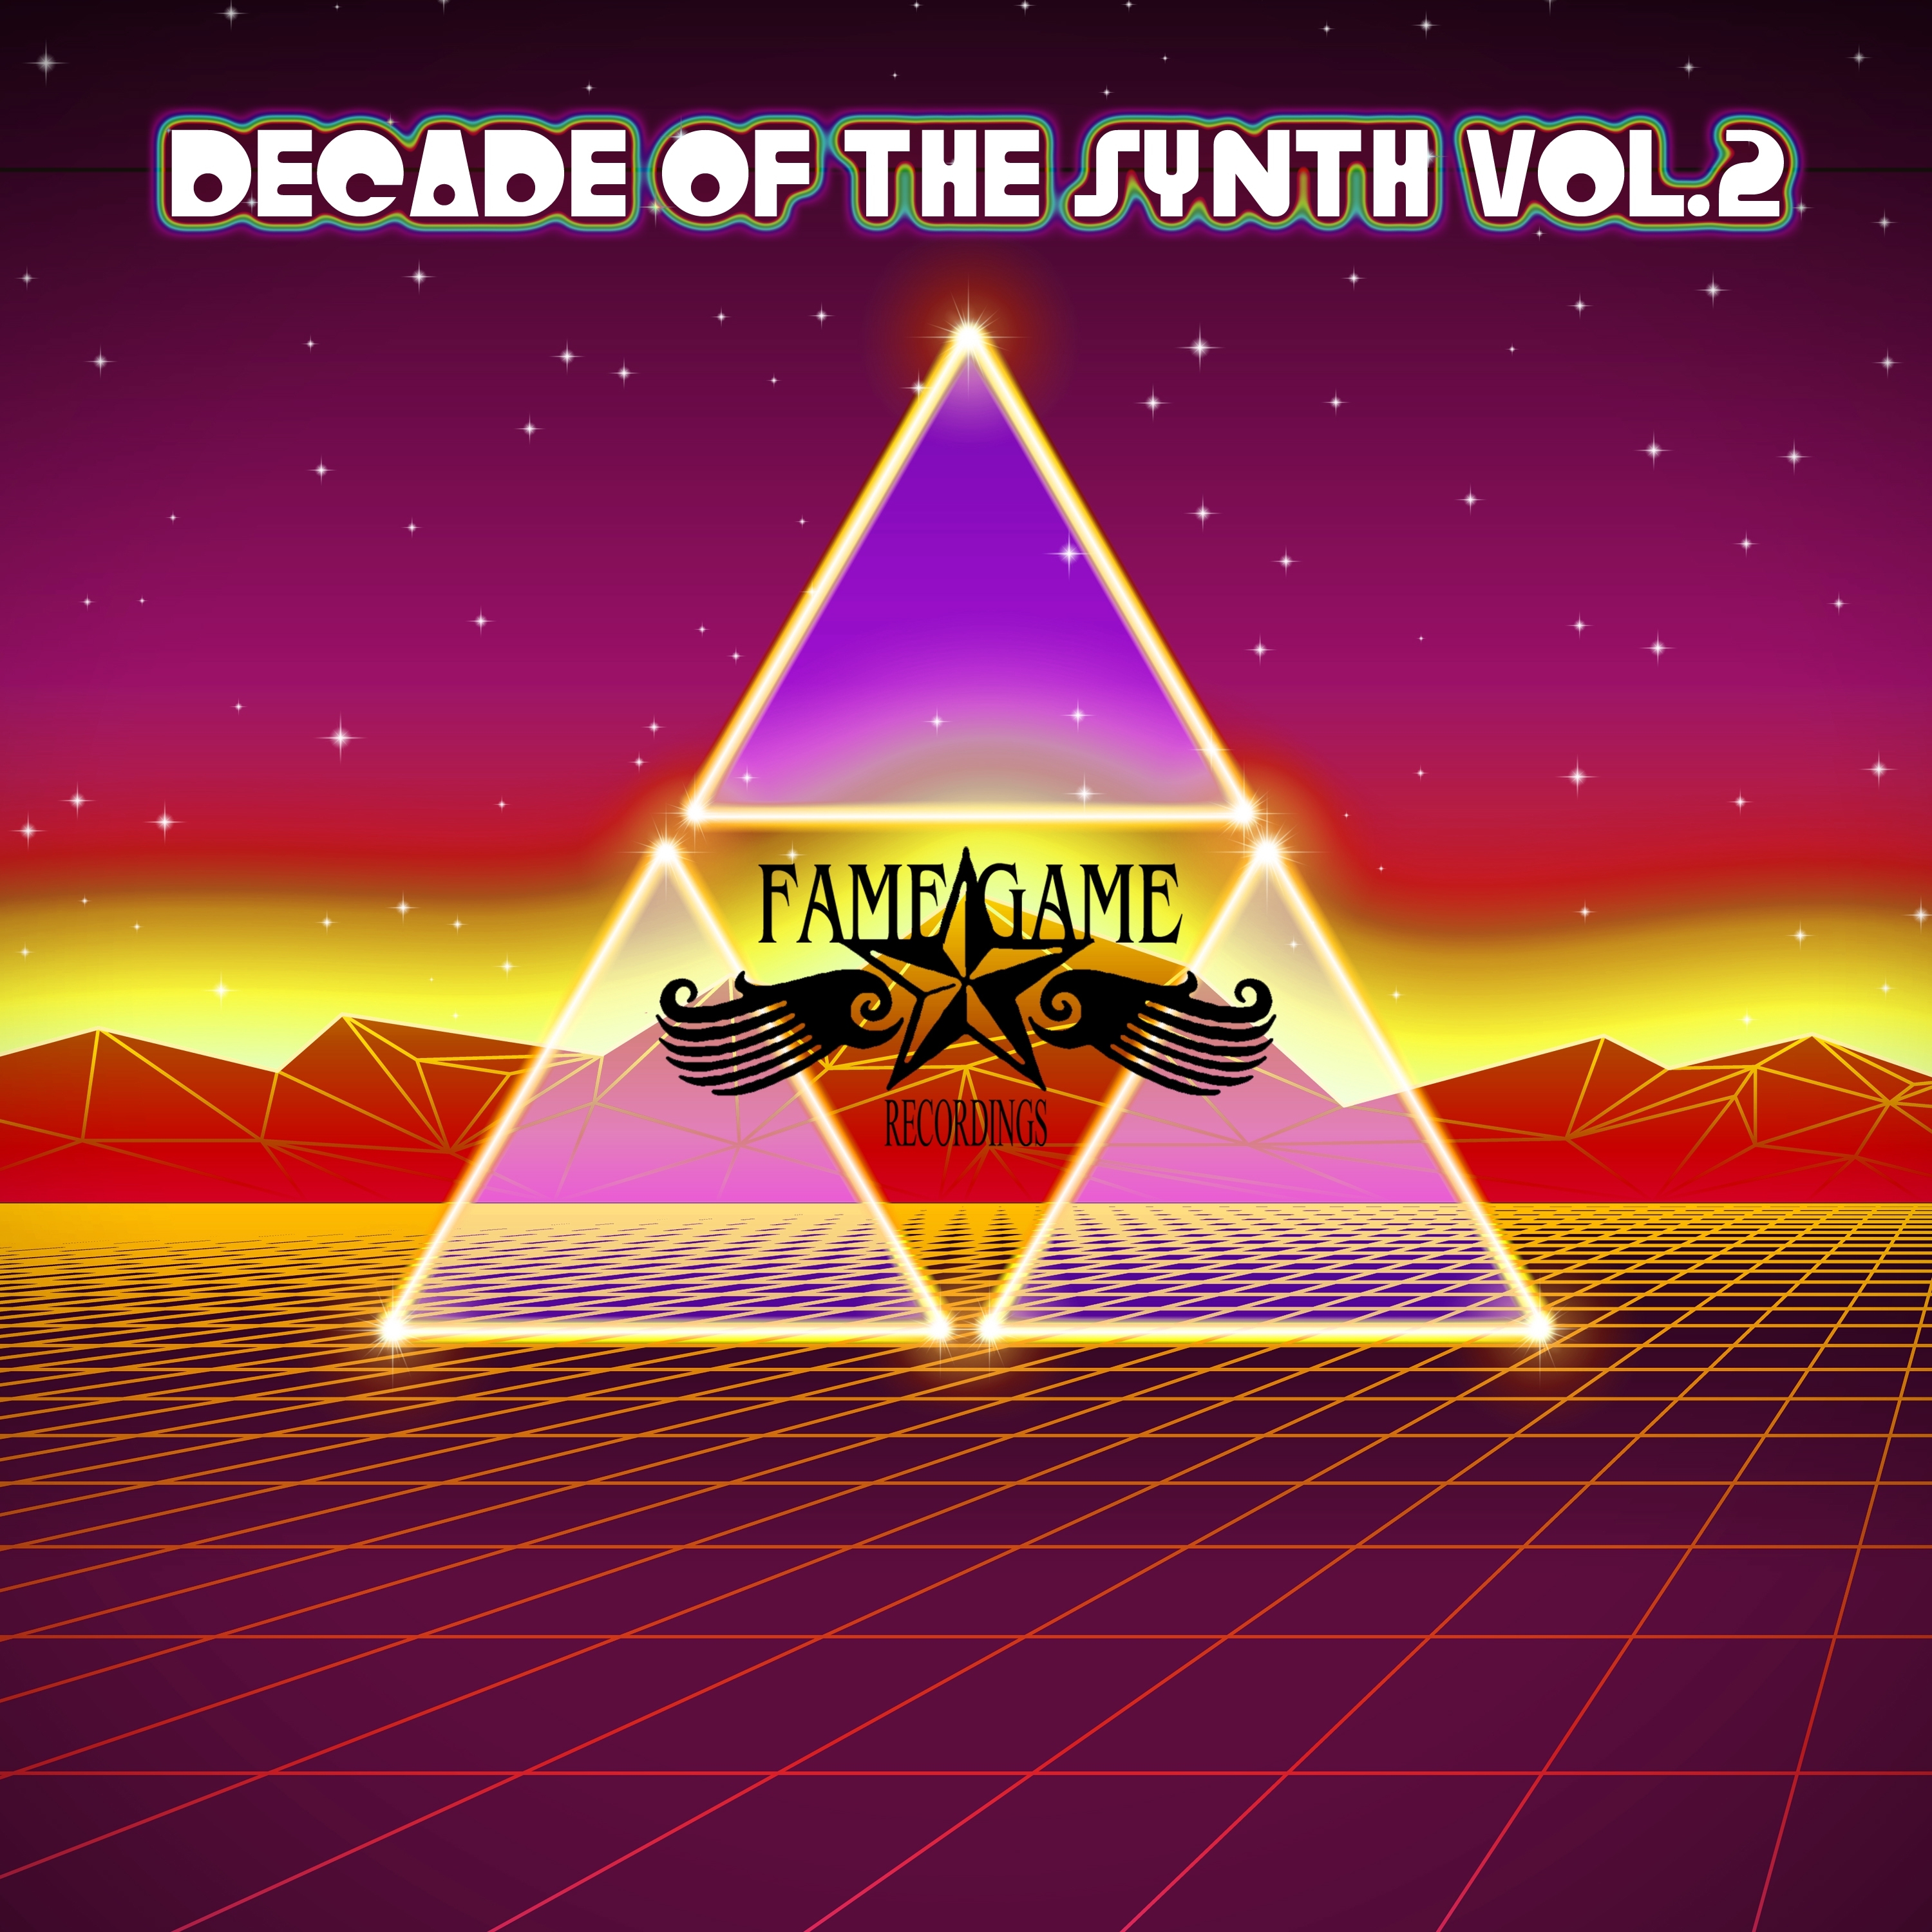 Decade of the Synth, Vol. 2